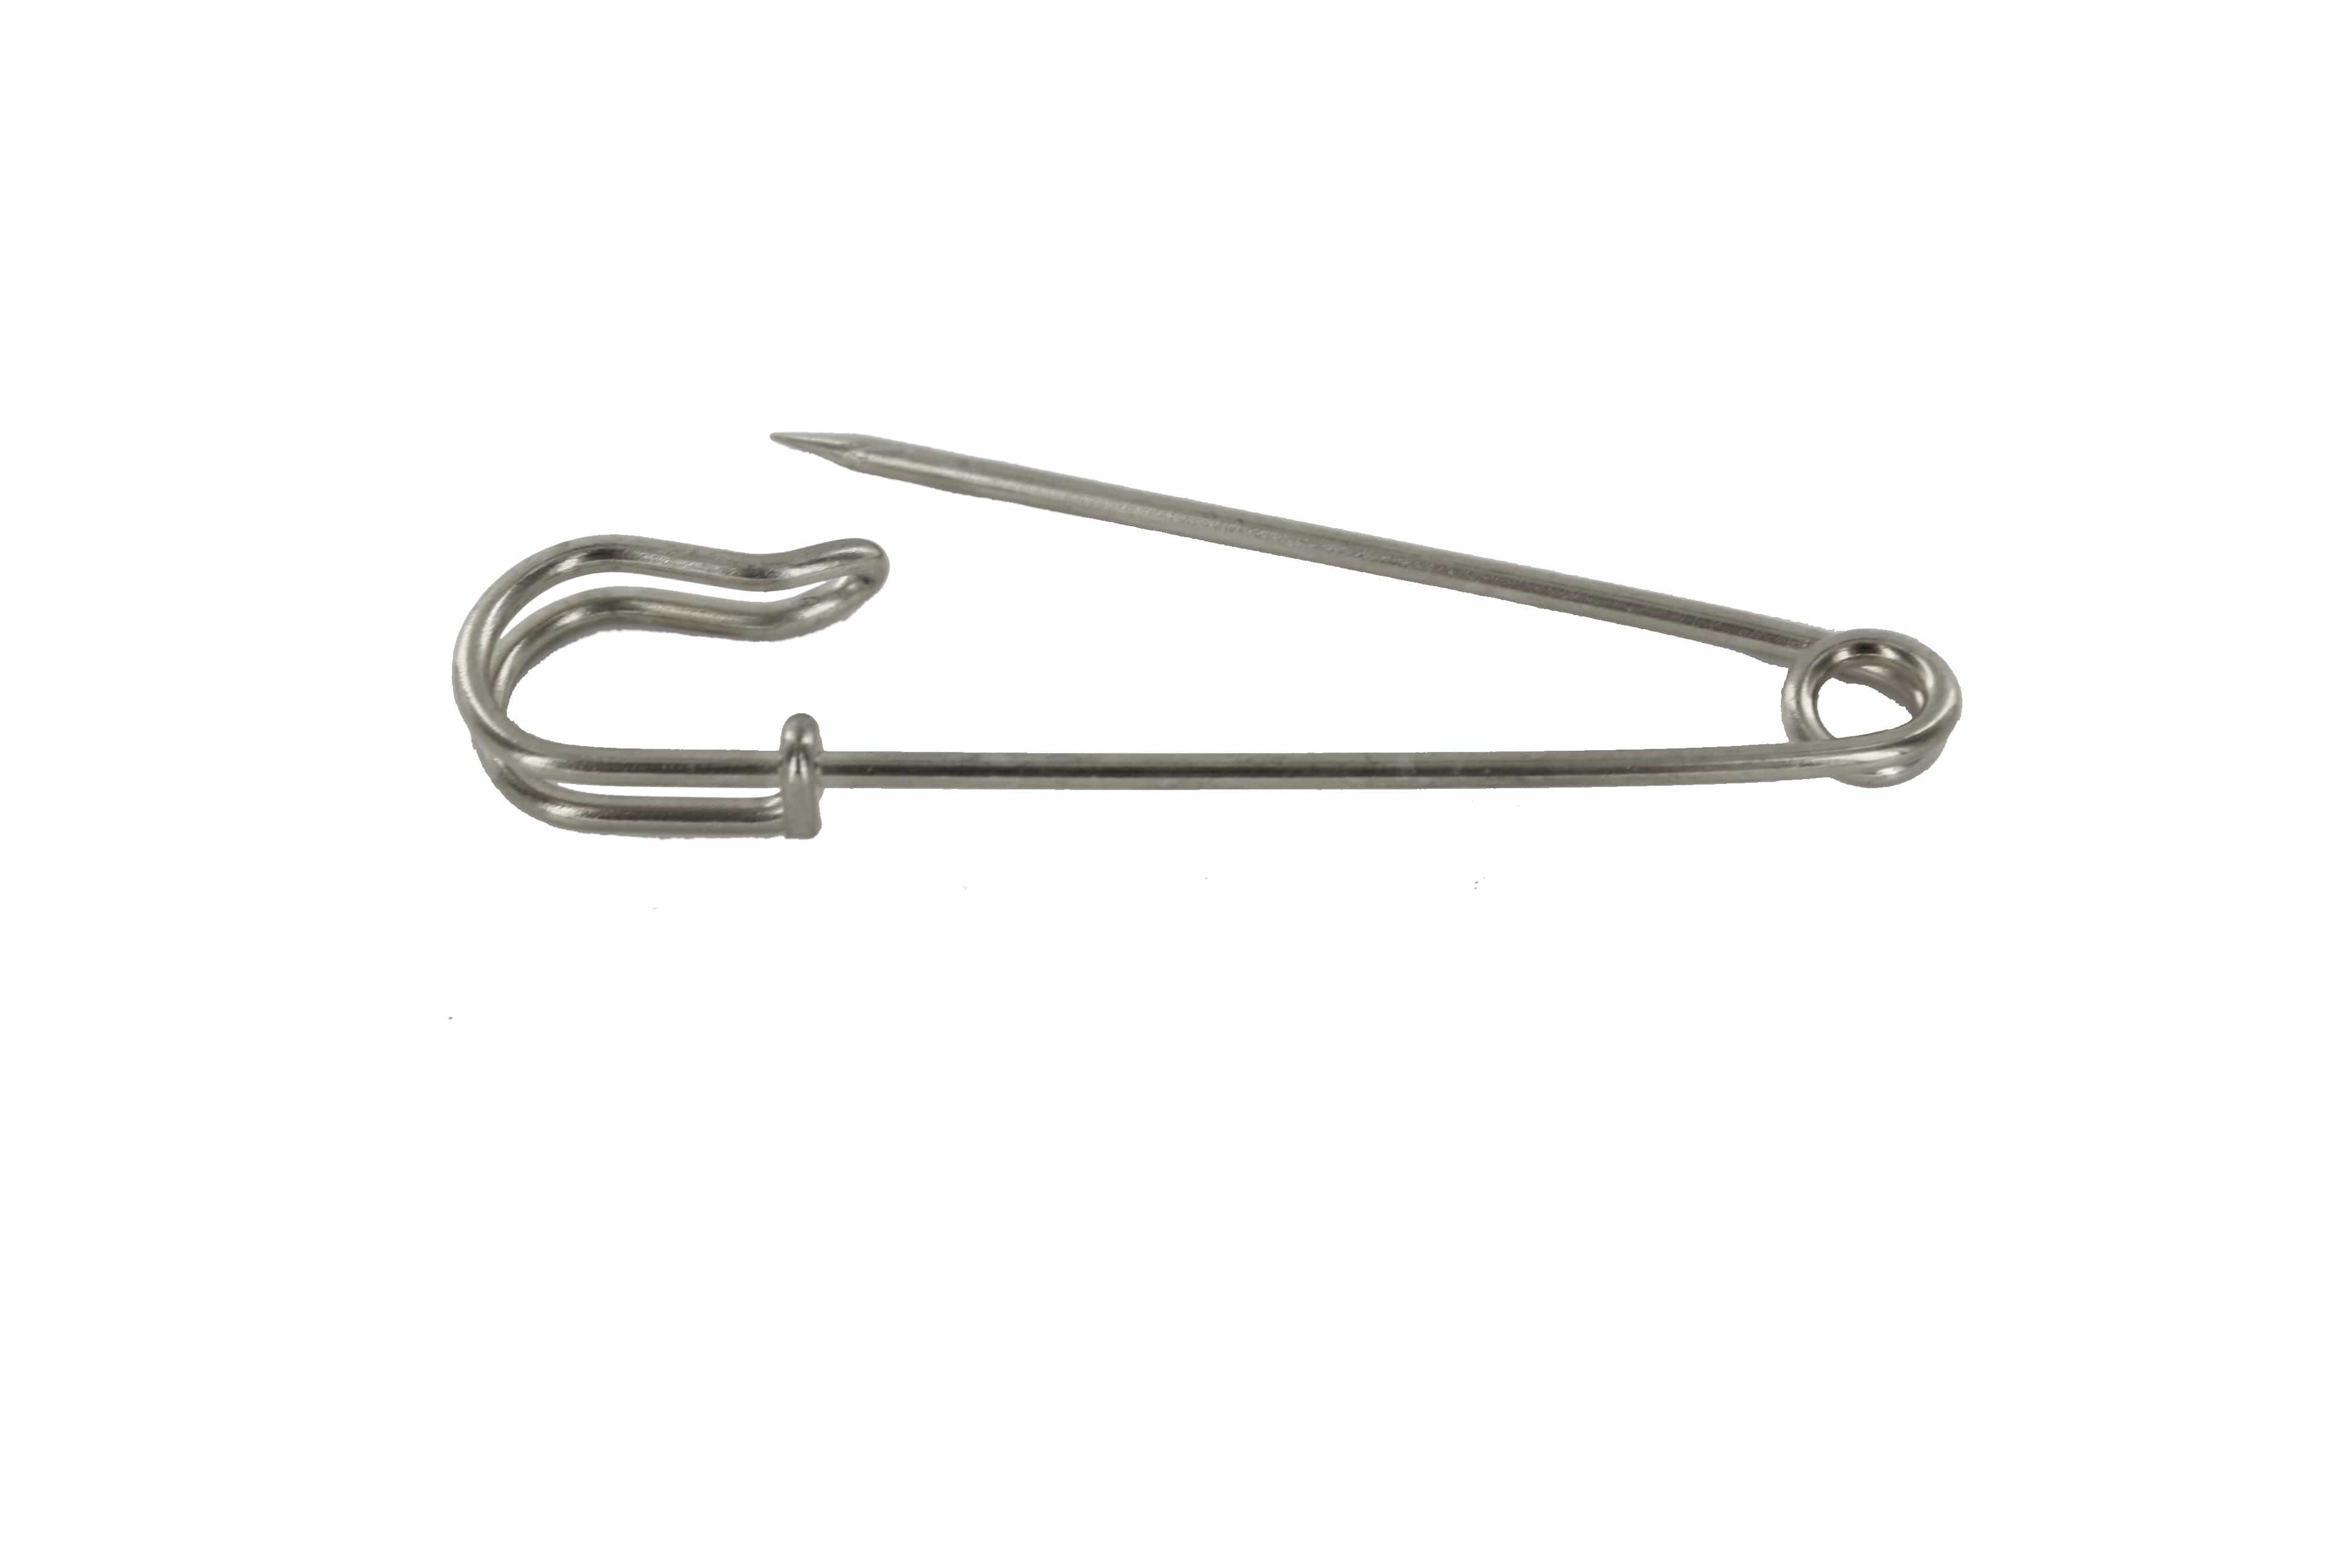 Ohio Travel Bag-Tools-3 Nickel, Kilt/Safety Pin, Steel - Pack 5,  #A-310-NP-$5.50